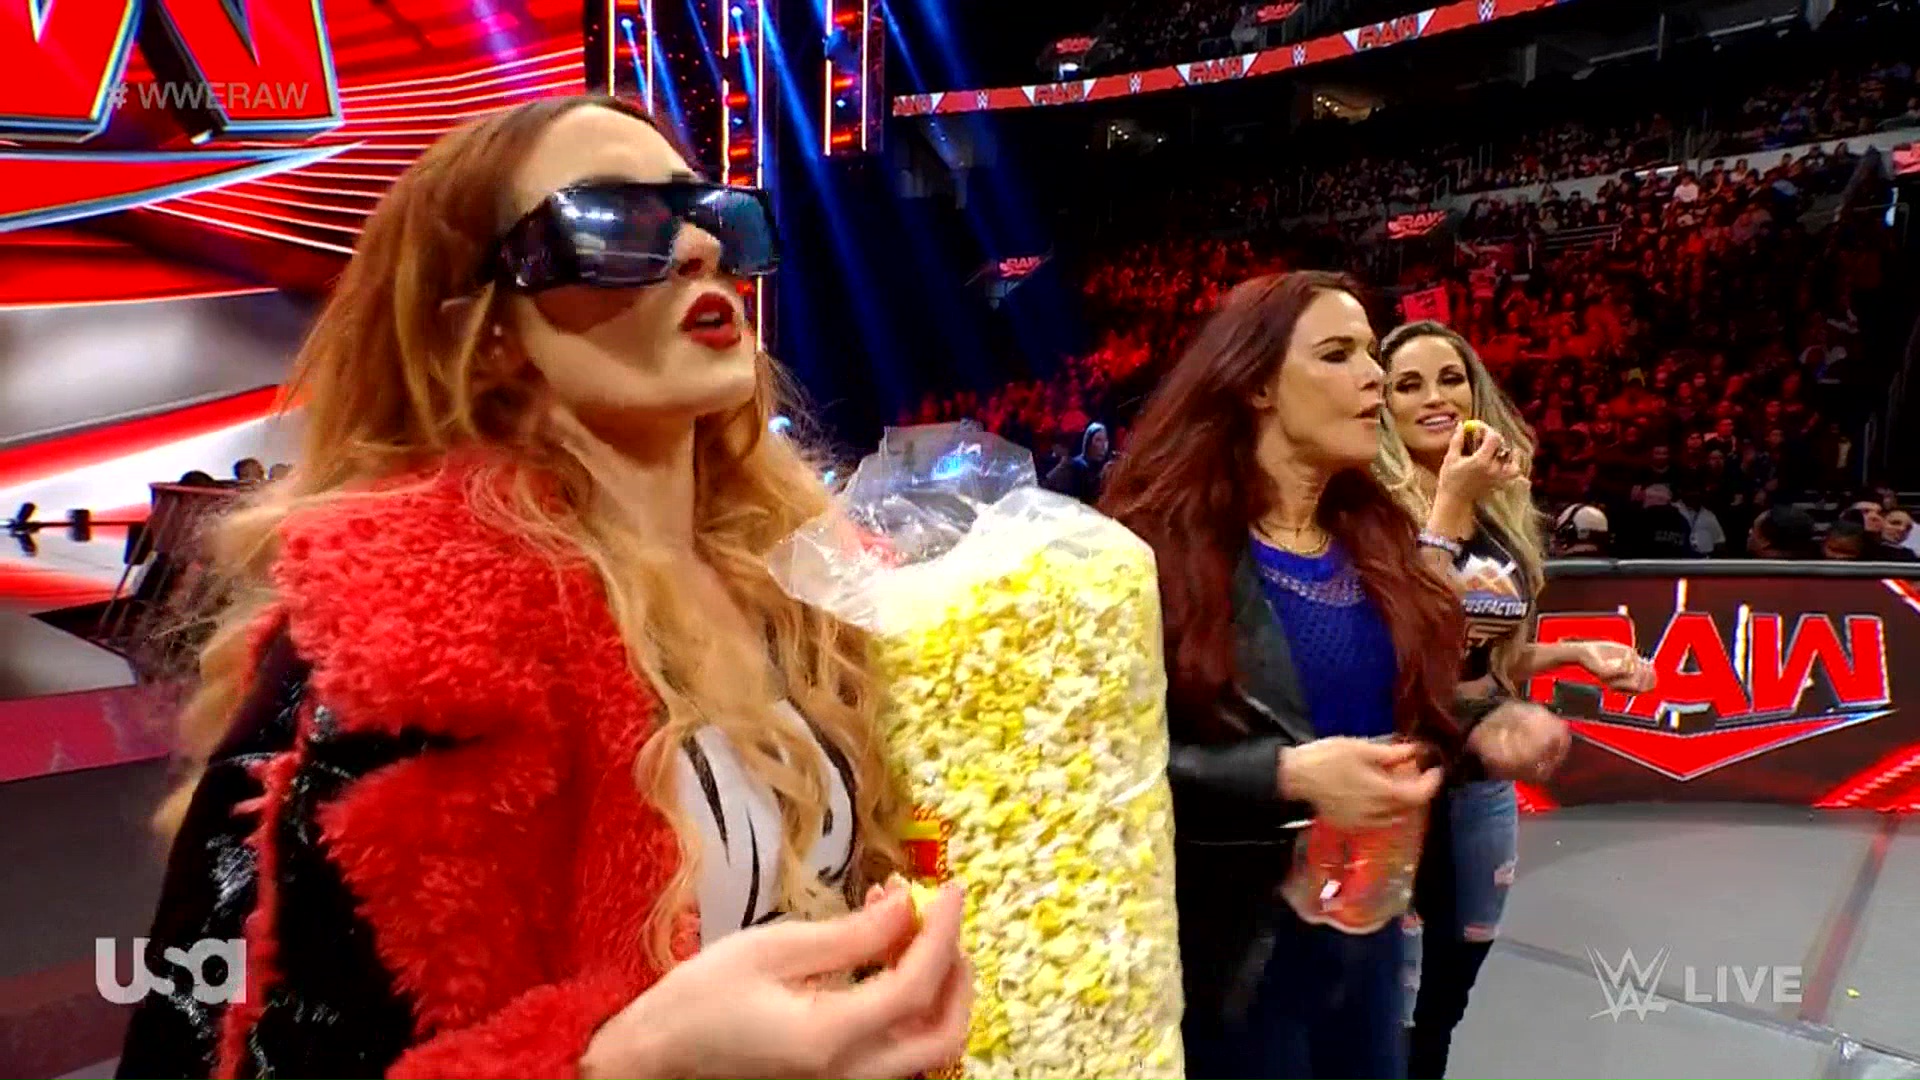 3/20 Raw results: Pass the popcorn